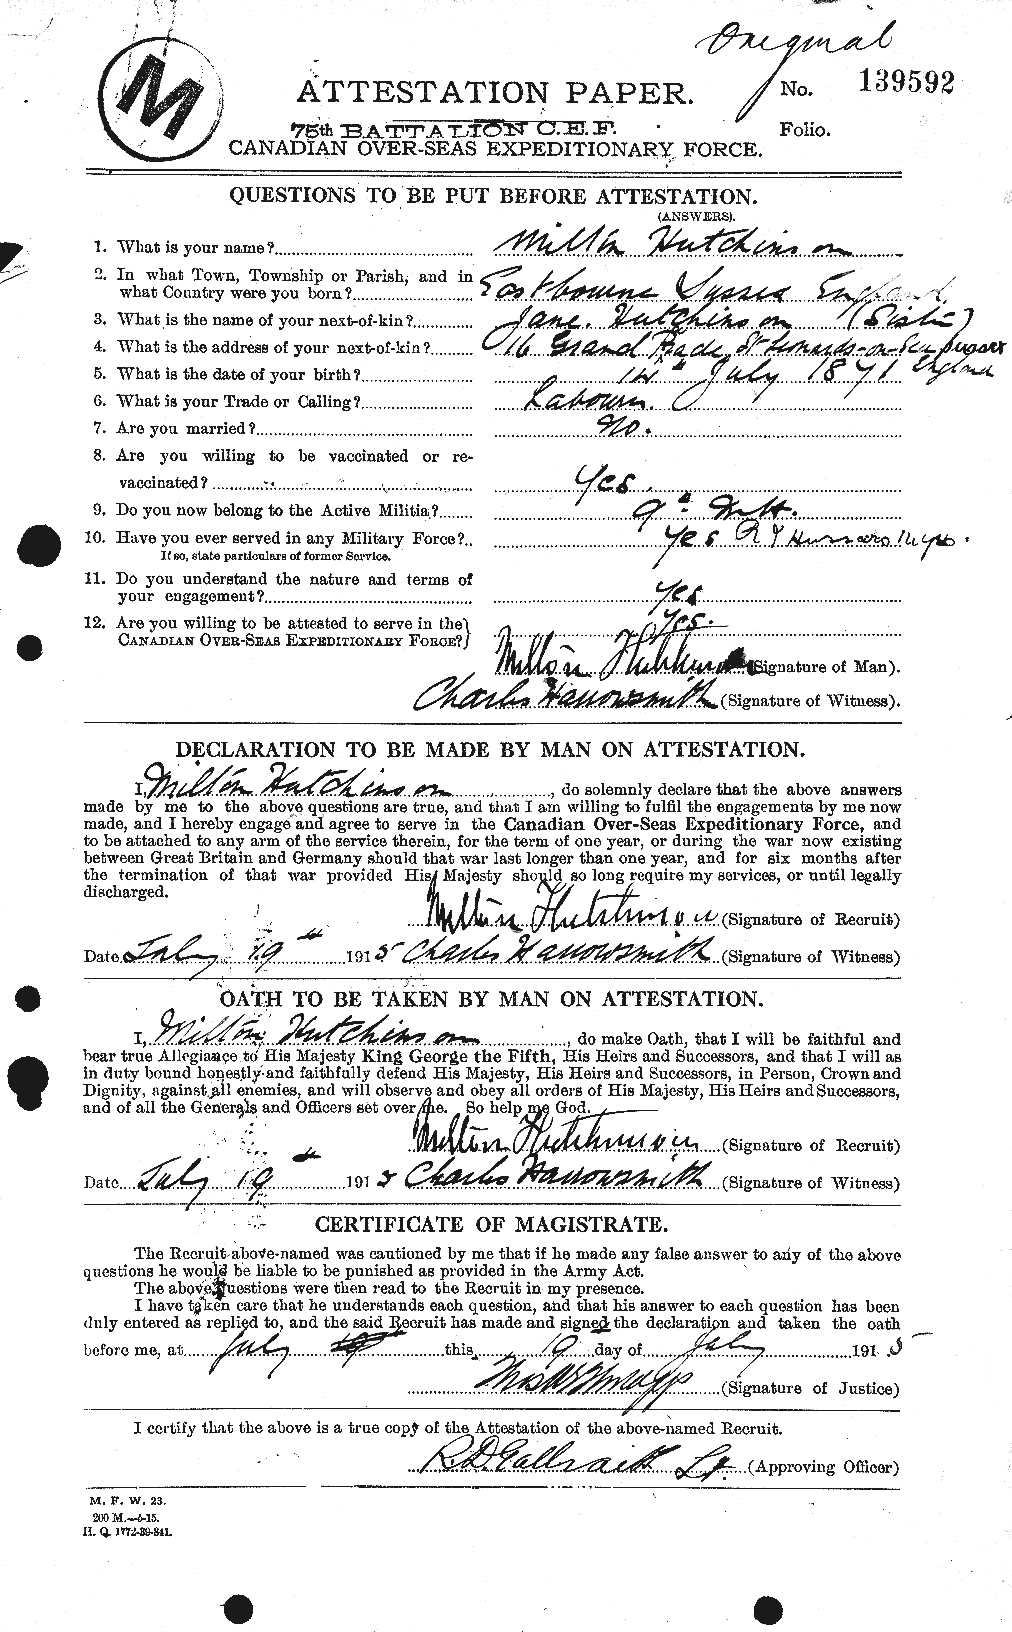 Personnel Records of the First World War - CEF 410733a